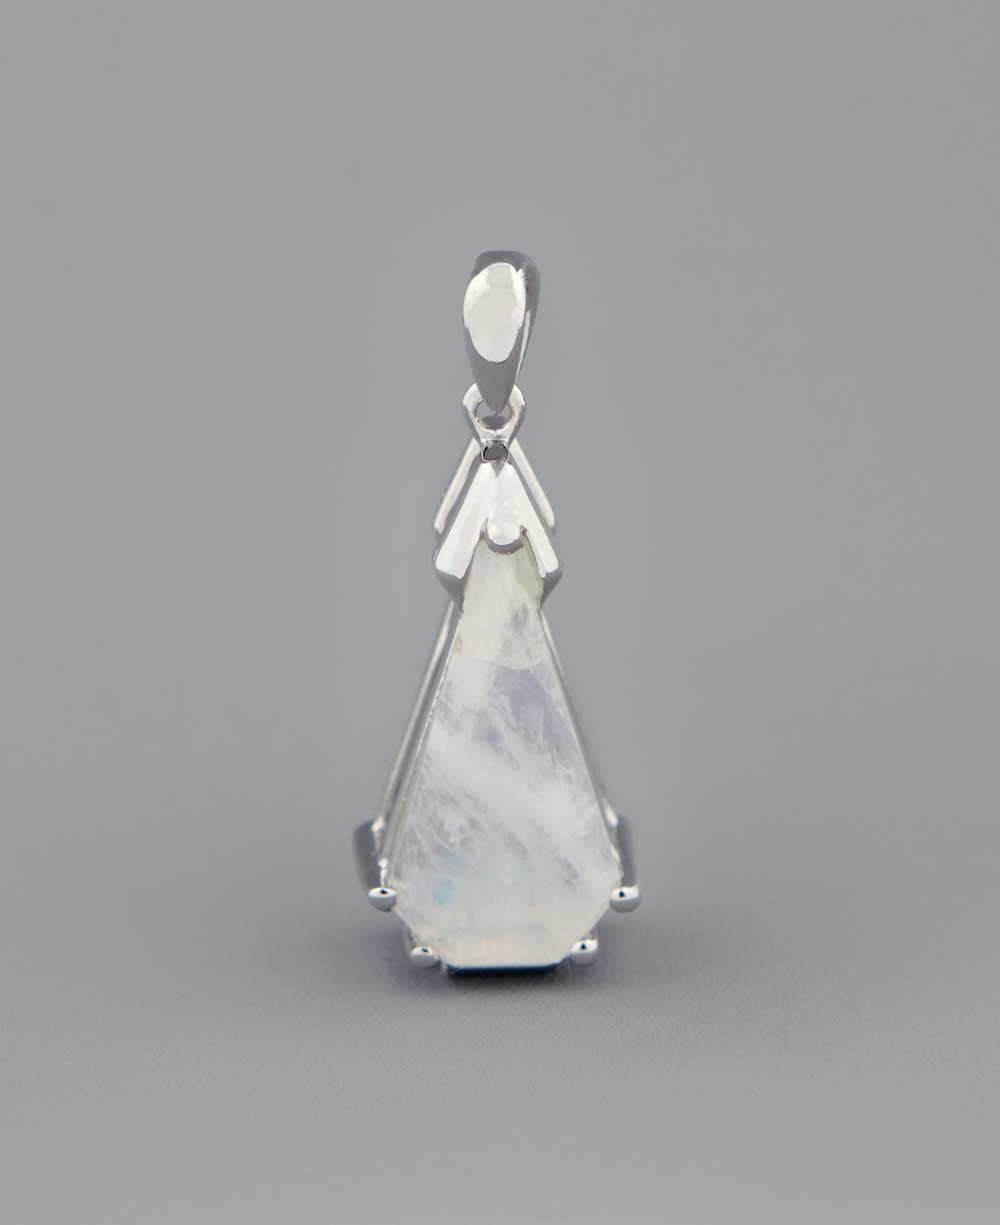 Tower of Tranquility Rainbow Moonstone Pendant - Charms & Pendants